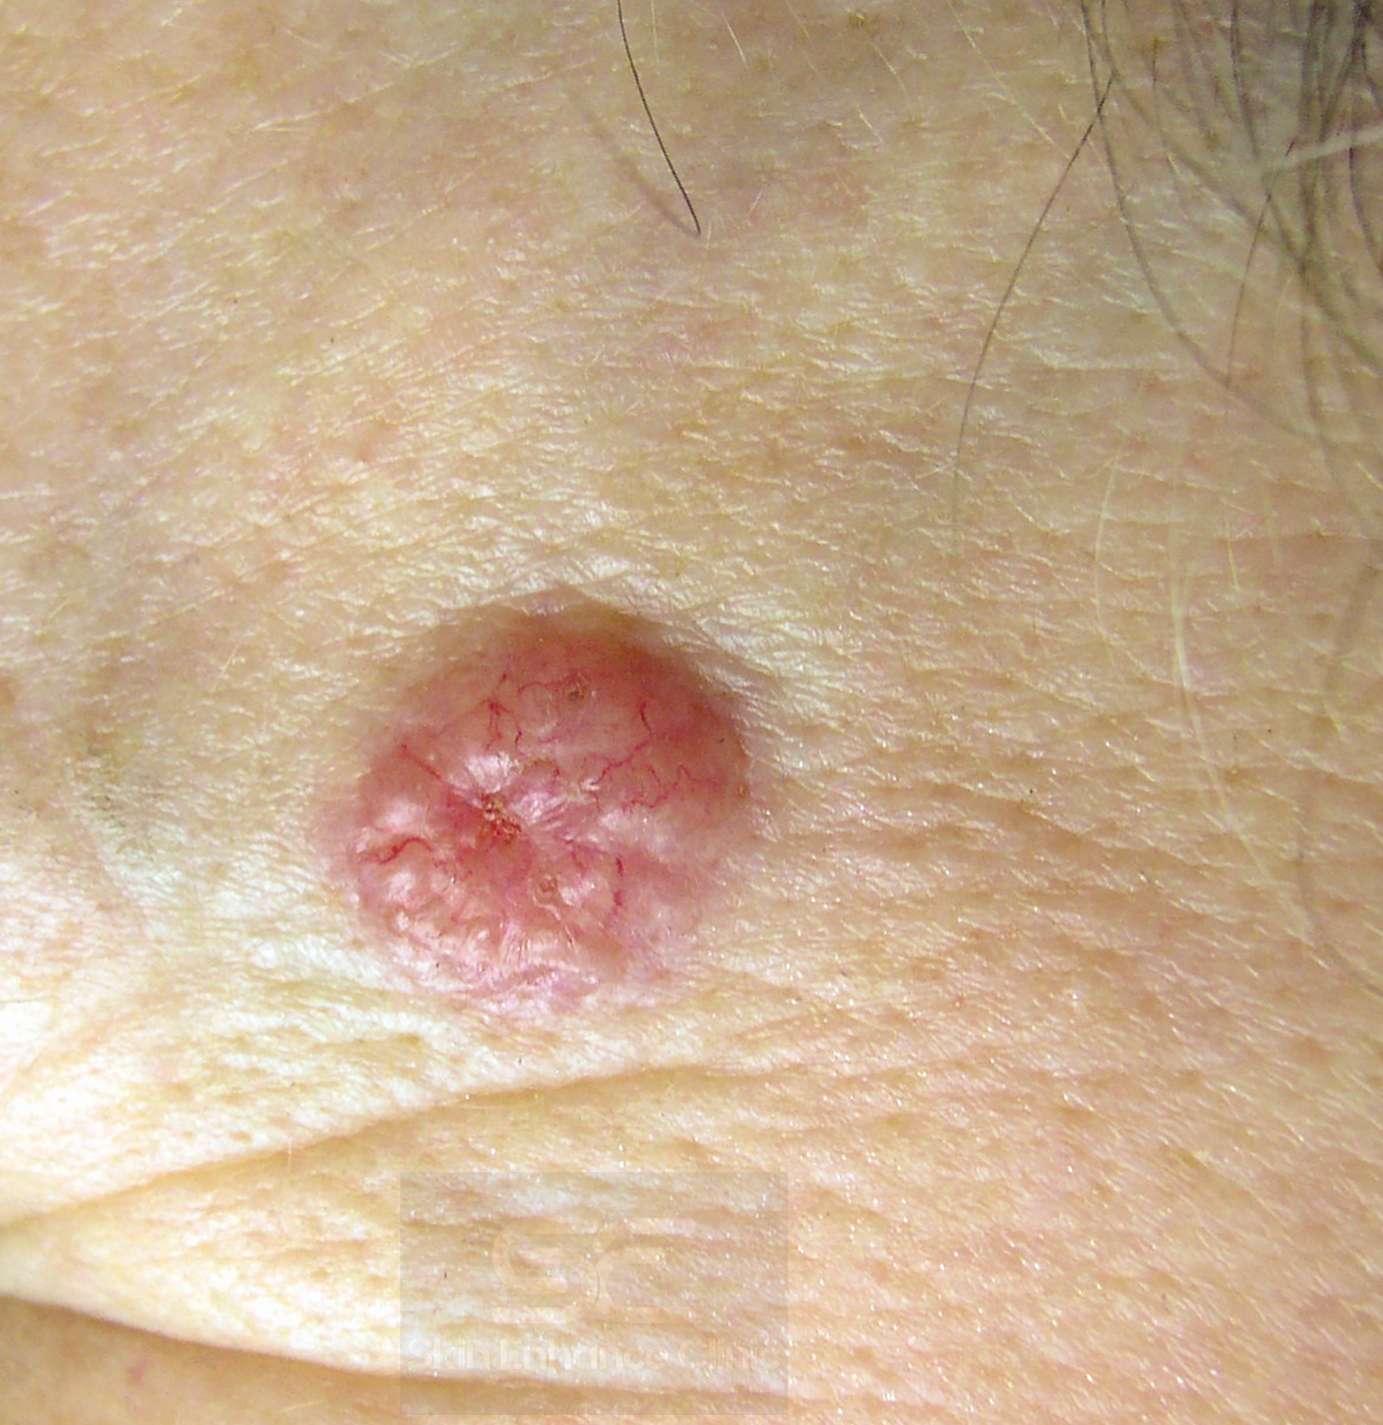 Skin Cancer and Precancerous Skin Lesions: What you need to know